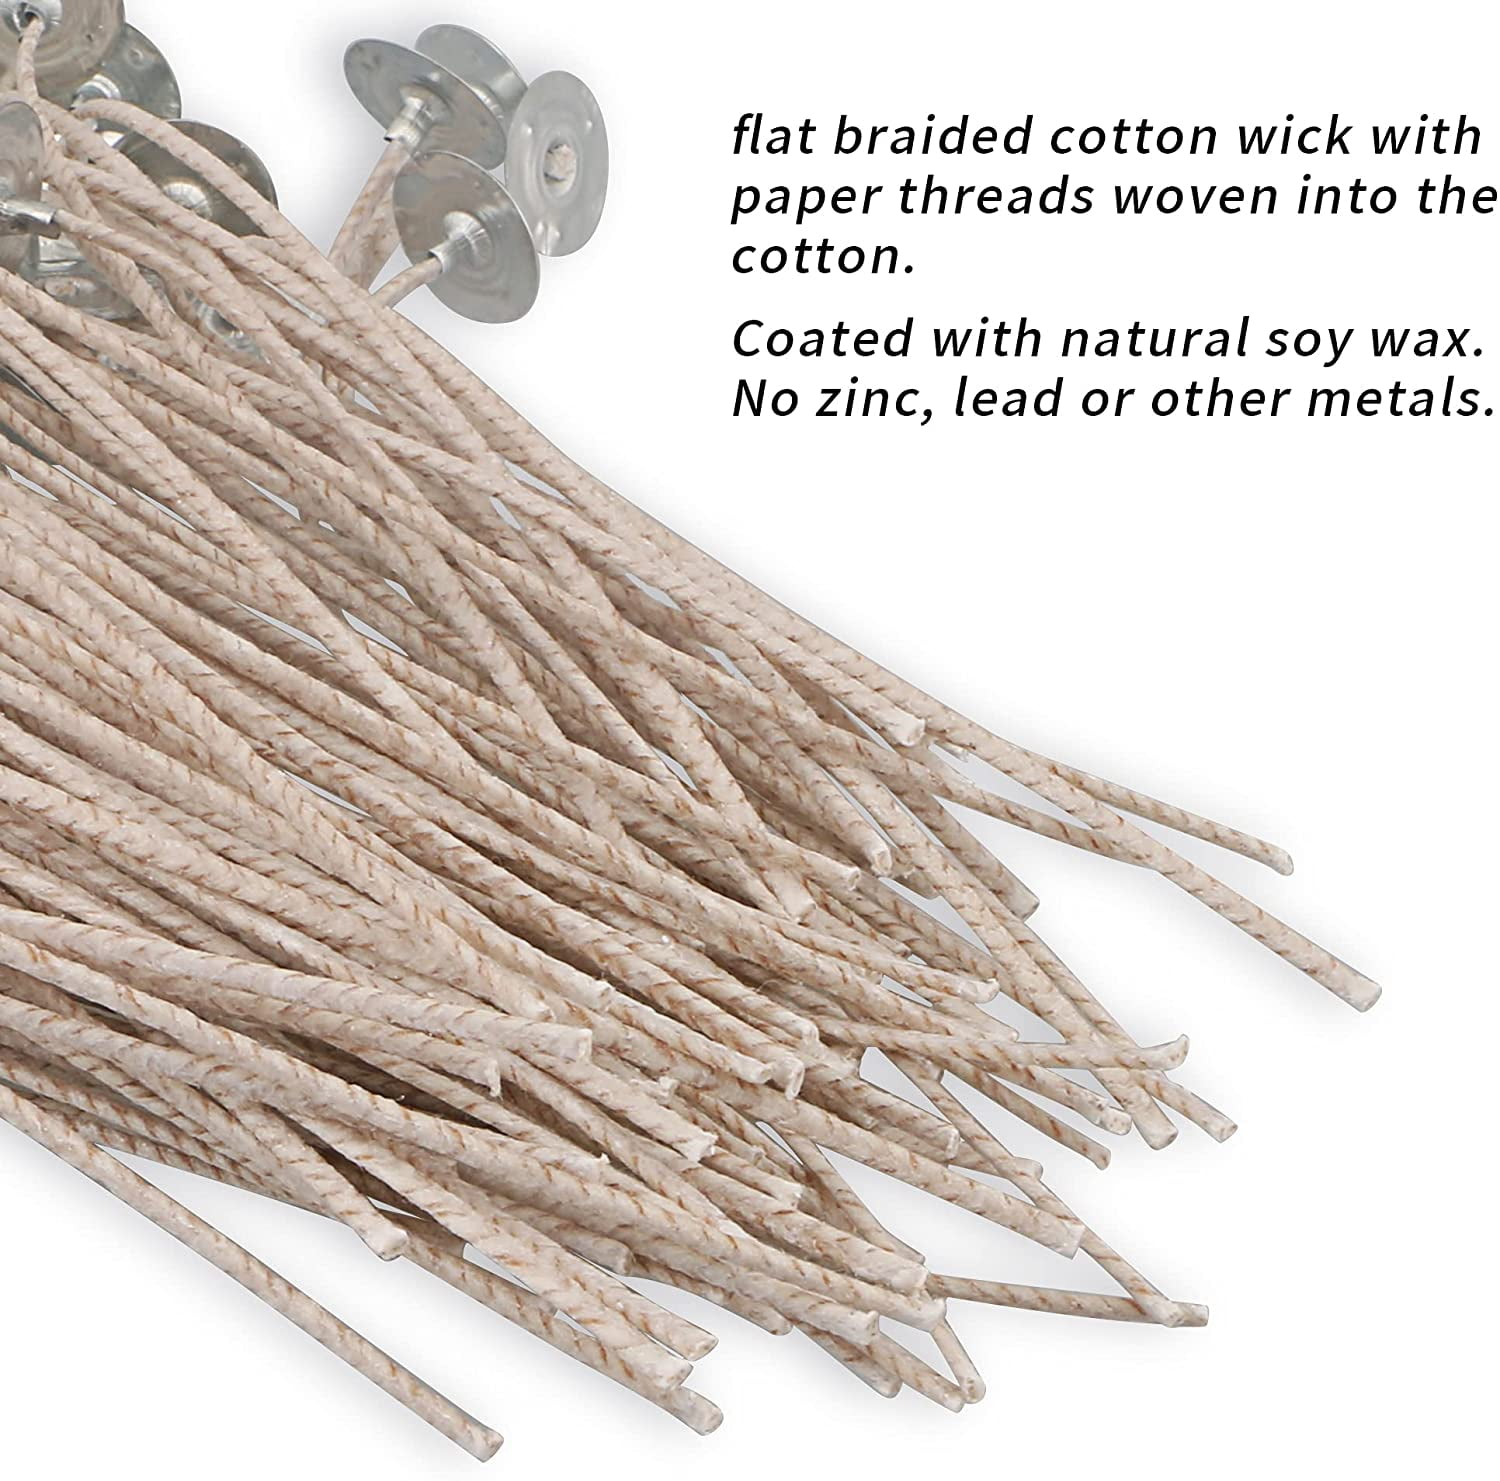 MILIVIXAY 100pcs/lot Candle Wicks for Candle Making - Coated with Natural Soy Wax, Low Smoke - Cotton Threads Woven with Paper - Candle DIY (6 inch)